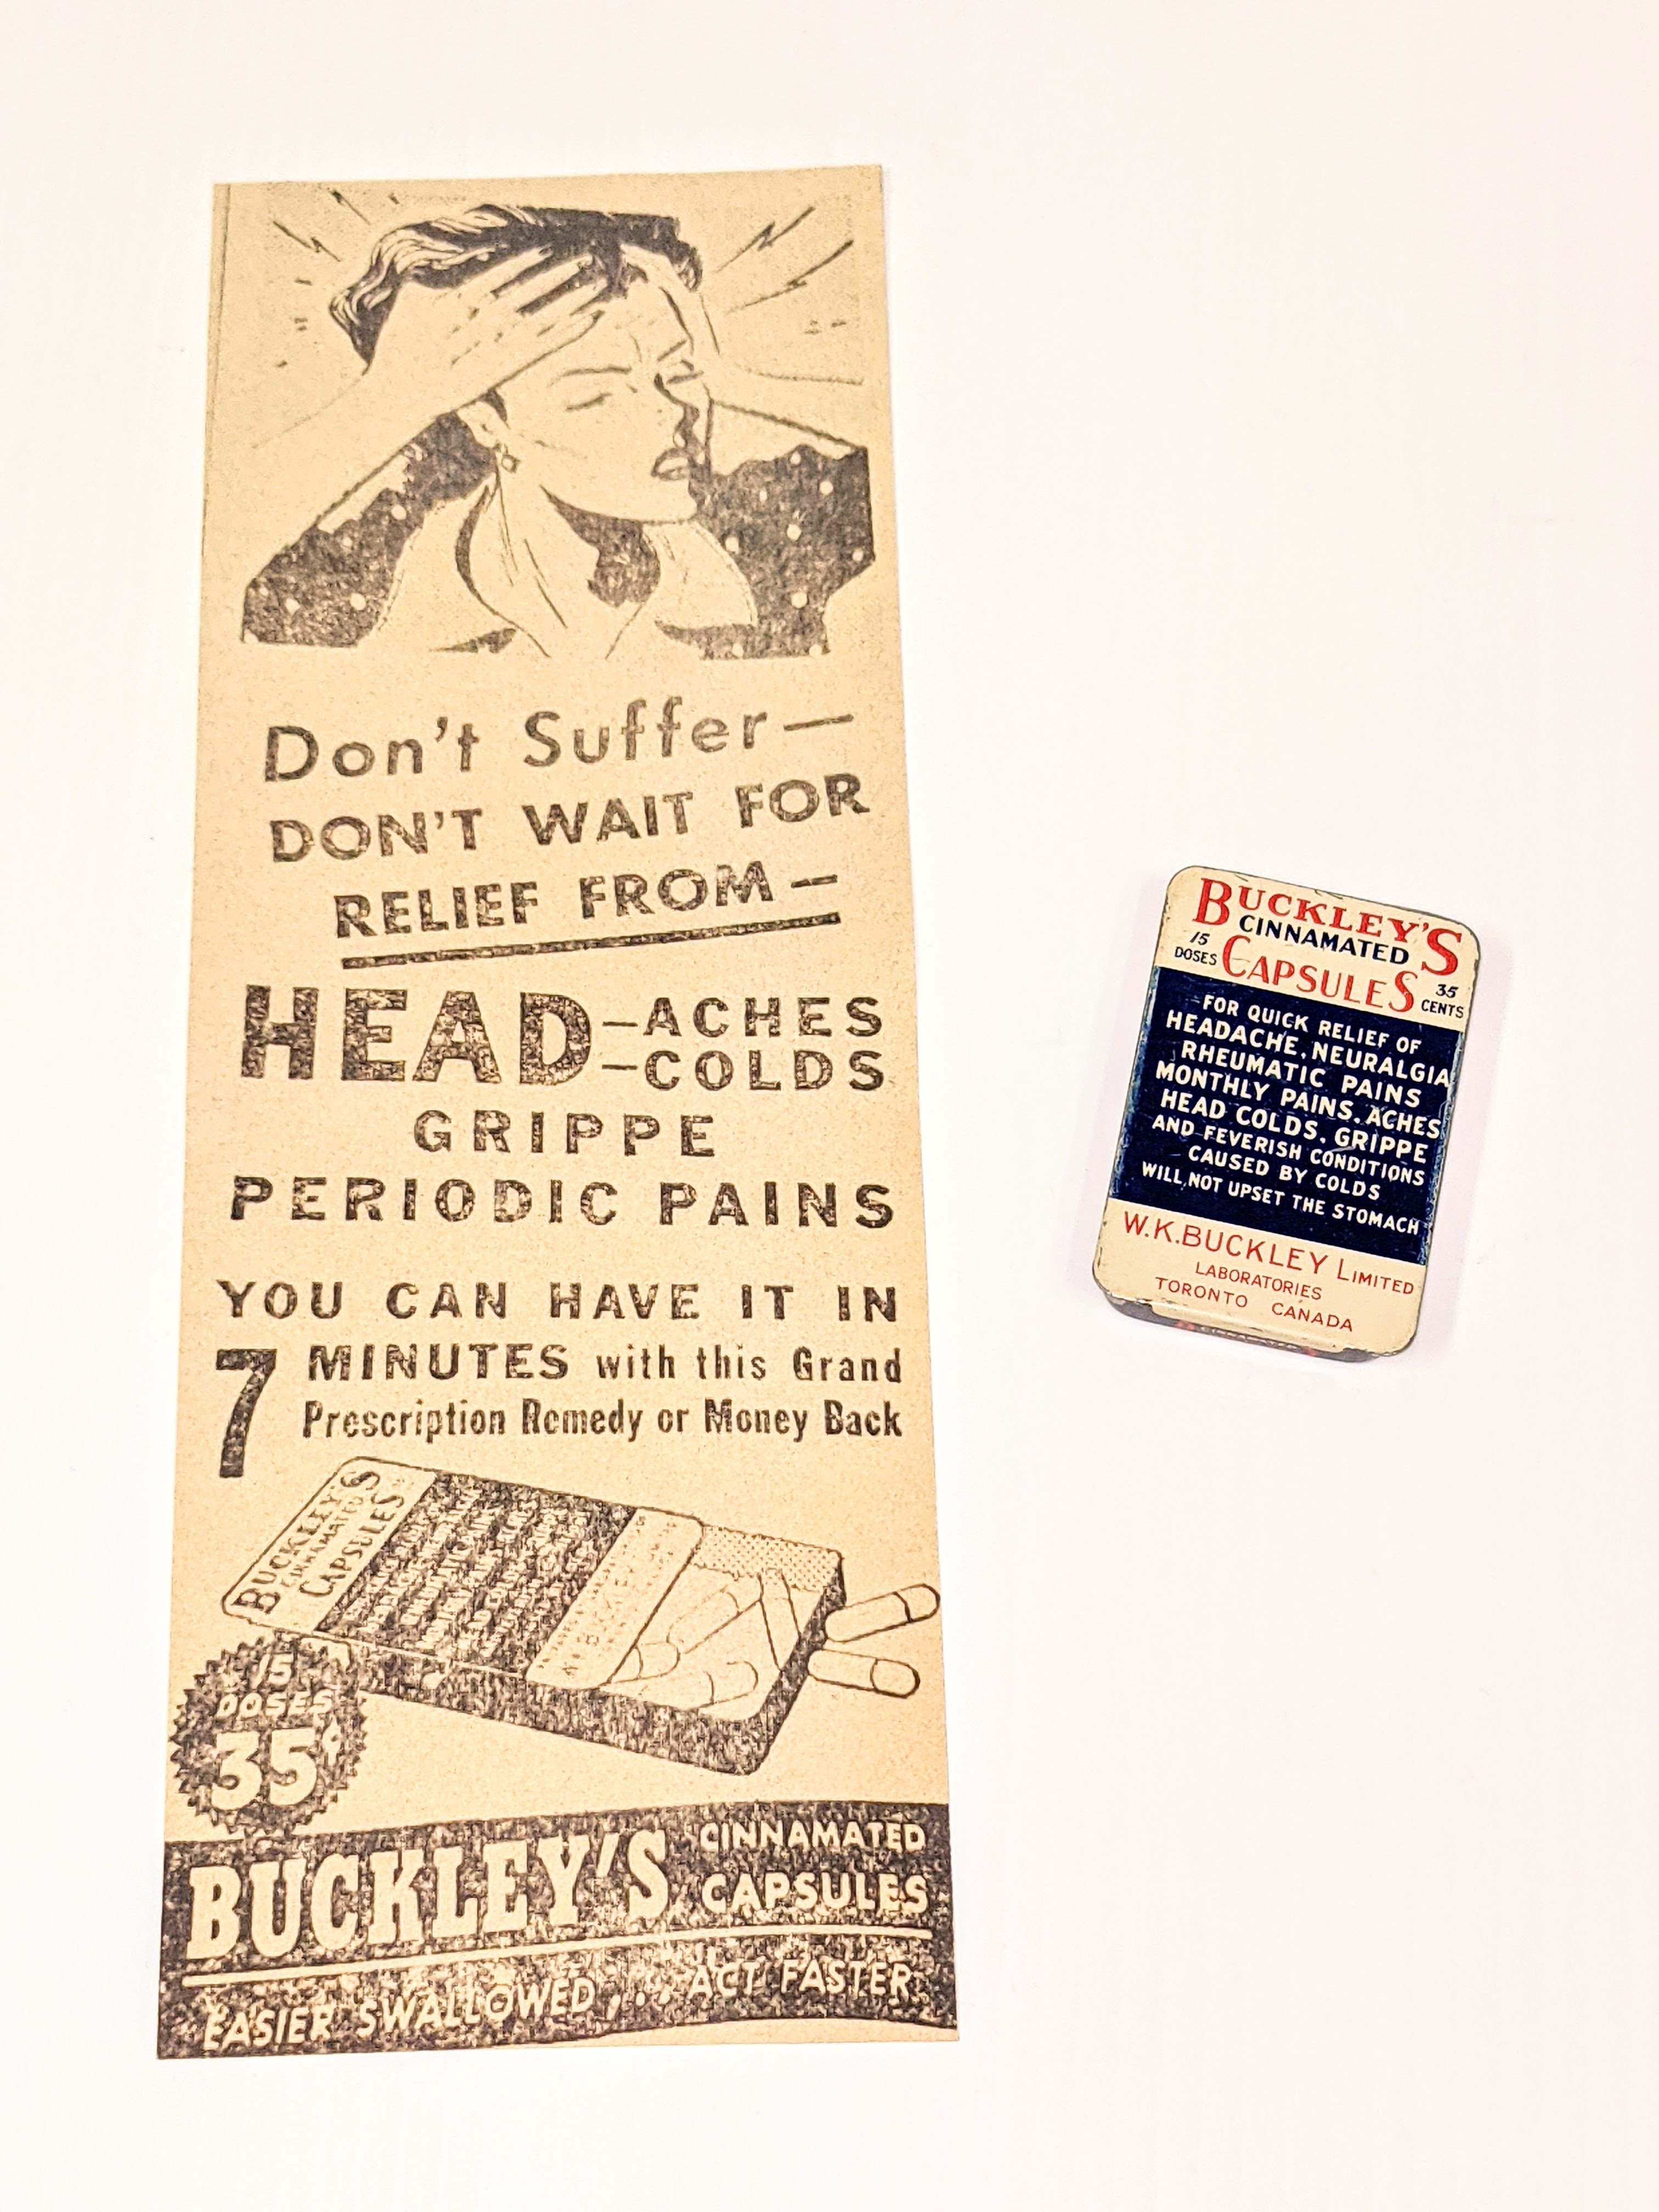 In response to the flu Pandemic, W.K Buckley Ltd. was established on March 20th of 1920 by a certified pharmacist from Nova Scotia named William Knapp Buckley. This 15 dose tin of Buckely's Cinnamated  Capsules sold for 35cents  during it's prime in the 40's and 50's - claiming to provide relief for: headache, neuralgia, rheumatic pains, monthly pains, aches, head colds, grippe and feverish conditions caused by colds. Buckleys Cinnamated Capsules were comprised of a mixture of Acetylsalicylic acid (Aspirin) and Phenacetin - both pain and fever reducers. Acetylsalicylic acid is still used widely today however Phenacetin was declared dangerous and with drawn from medical use in Canada in 1973.

28/06/2021
2016.36.56 / Swalm, Mary